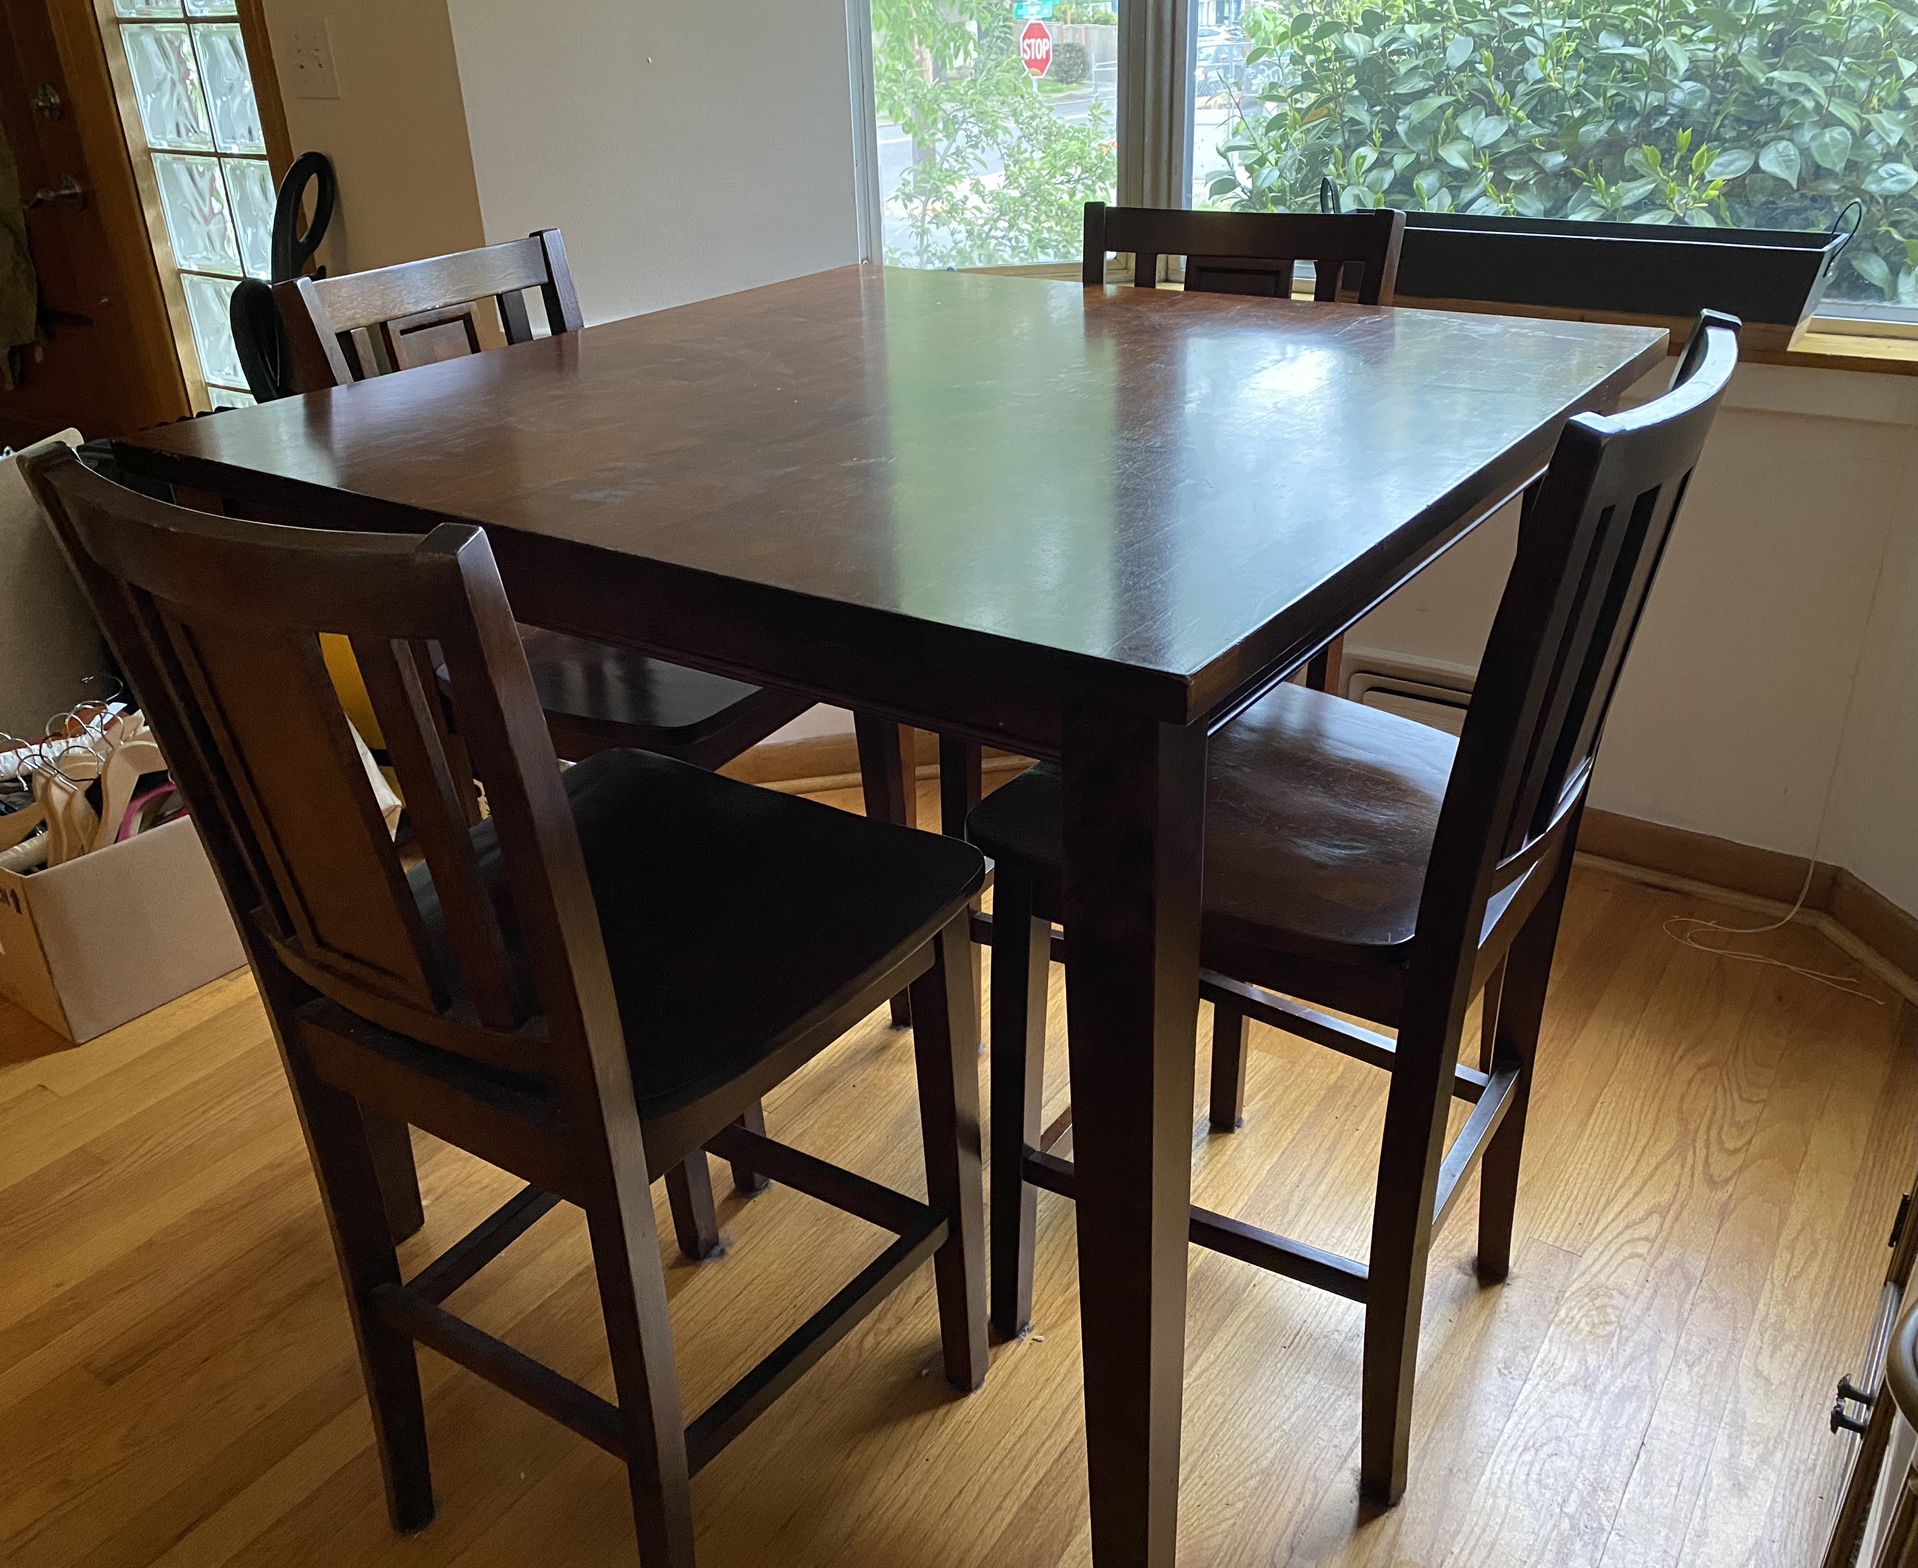 Vintage Counter-Height Dining Table w/ 4 Chairs